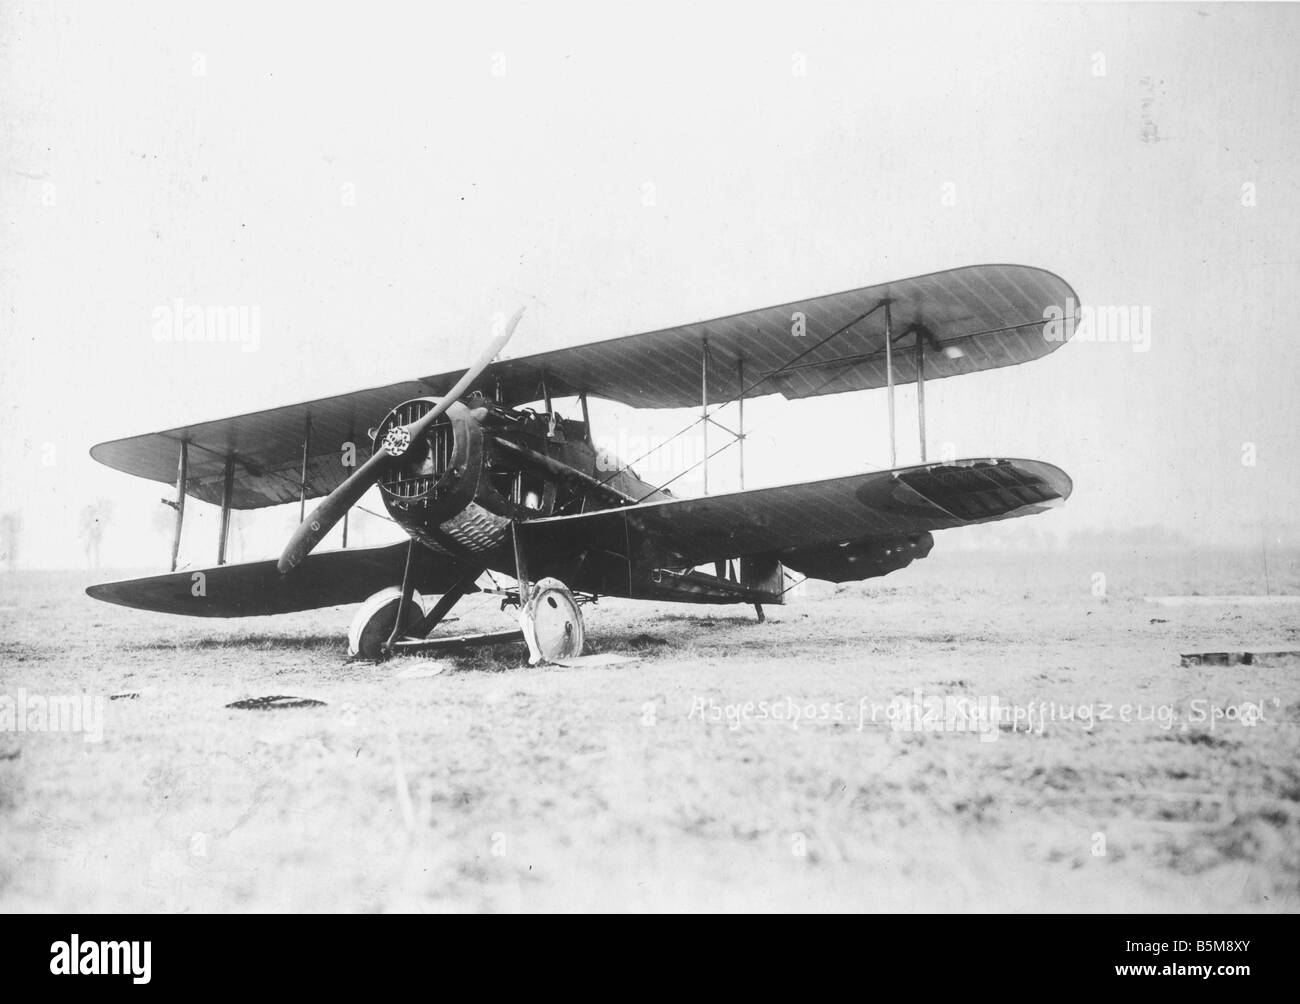 2 G55 L2 1917 3 WWI Shot down French Spad History WWI Aerial Warfare Shot down French battle plane Spad Photo no date c 1917 Stock Photo